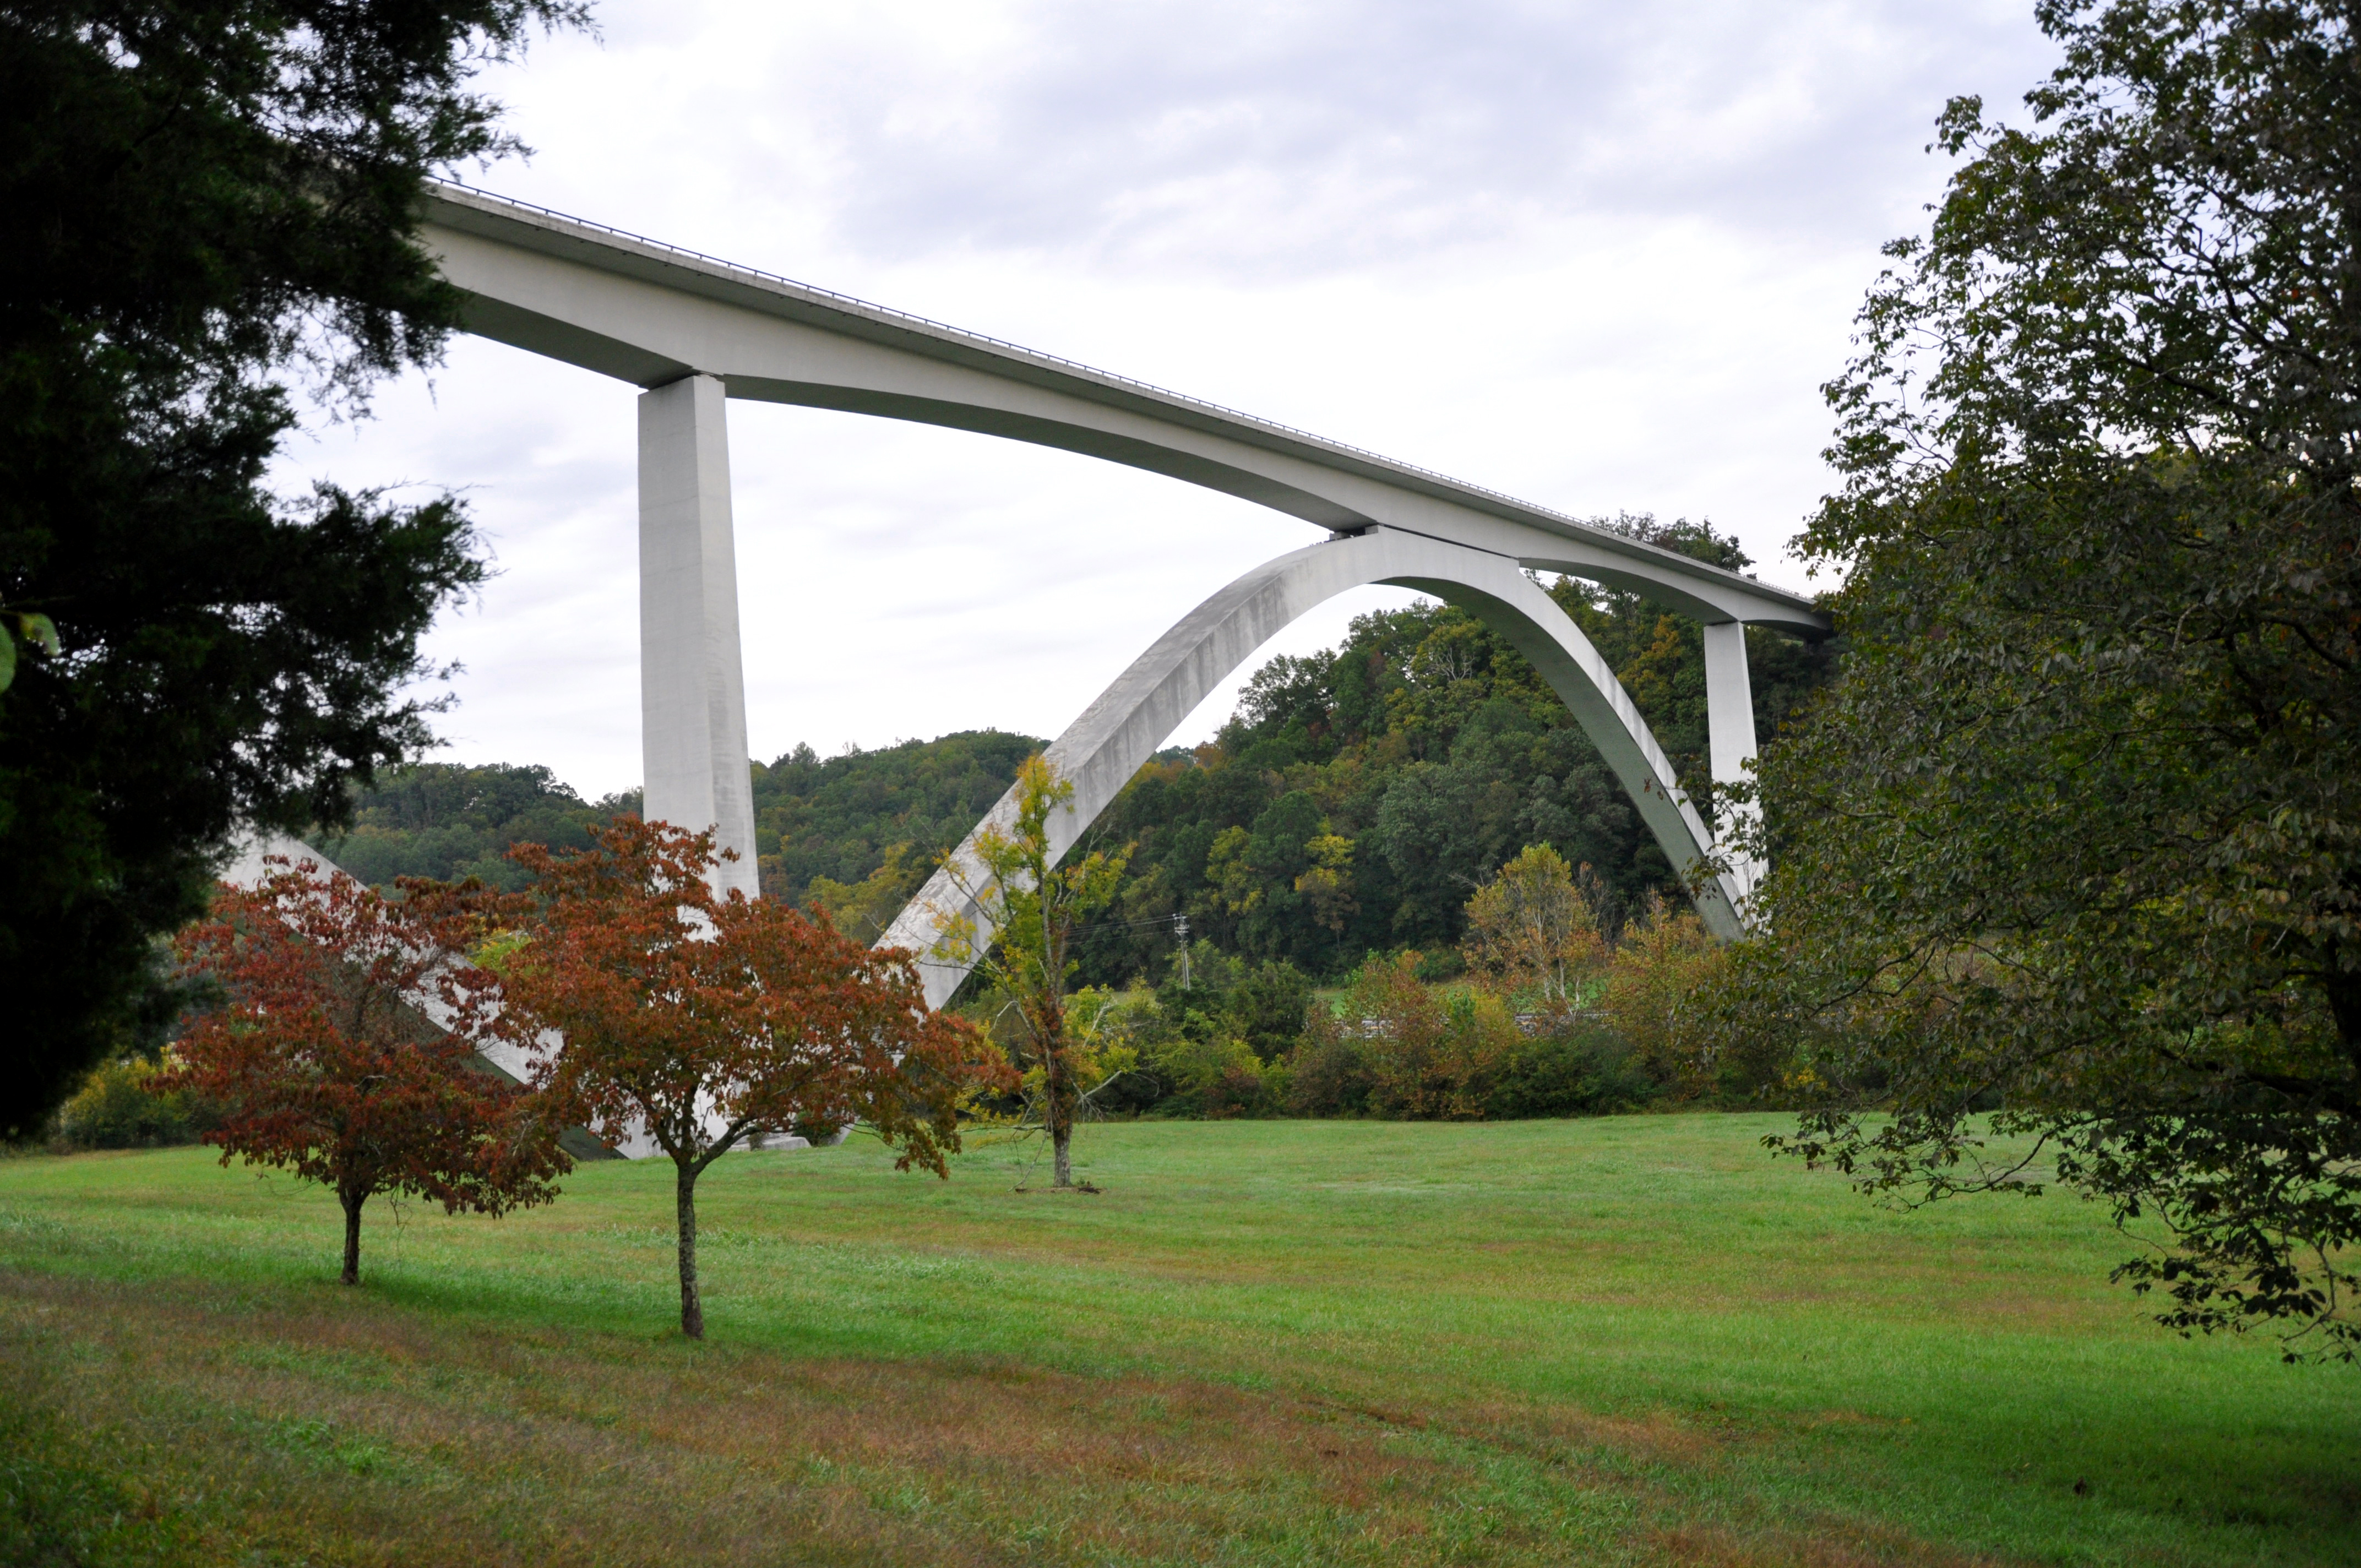 View of the Double Arch Bridge from Birdsong Hollow